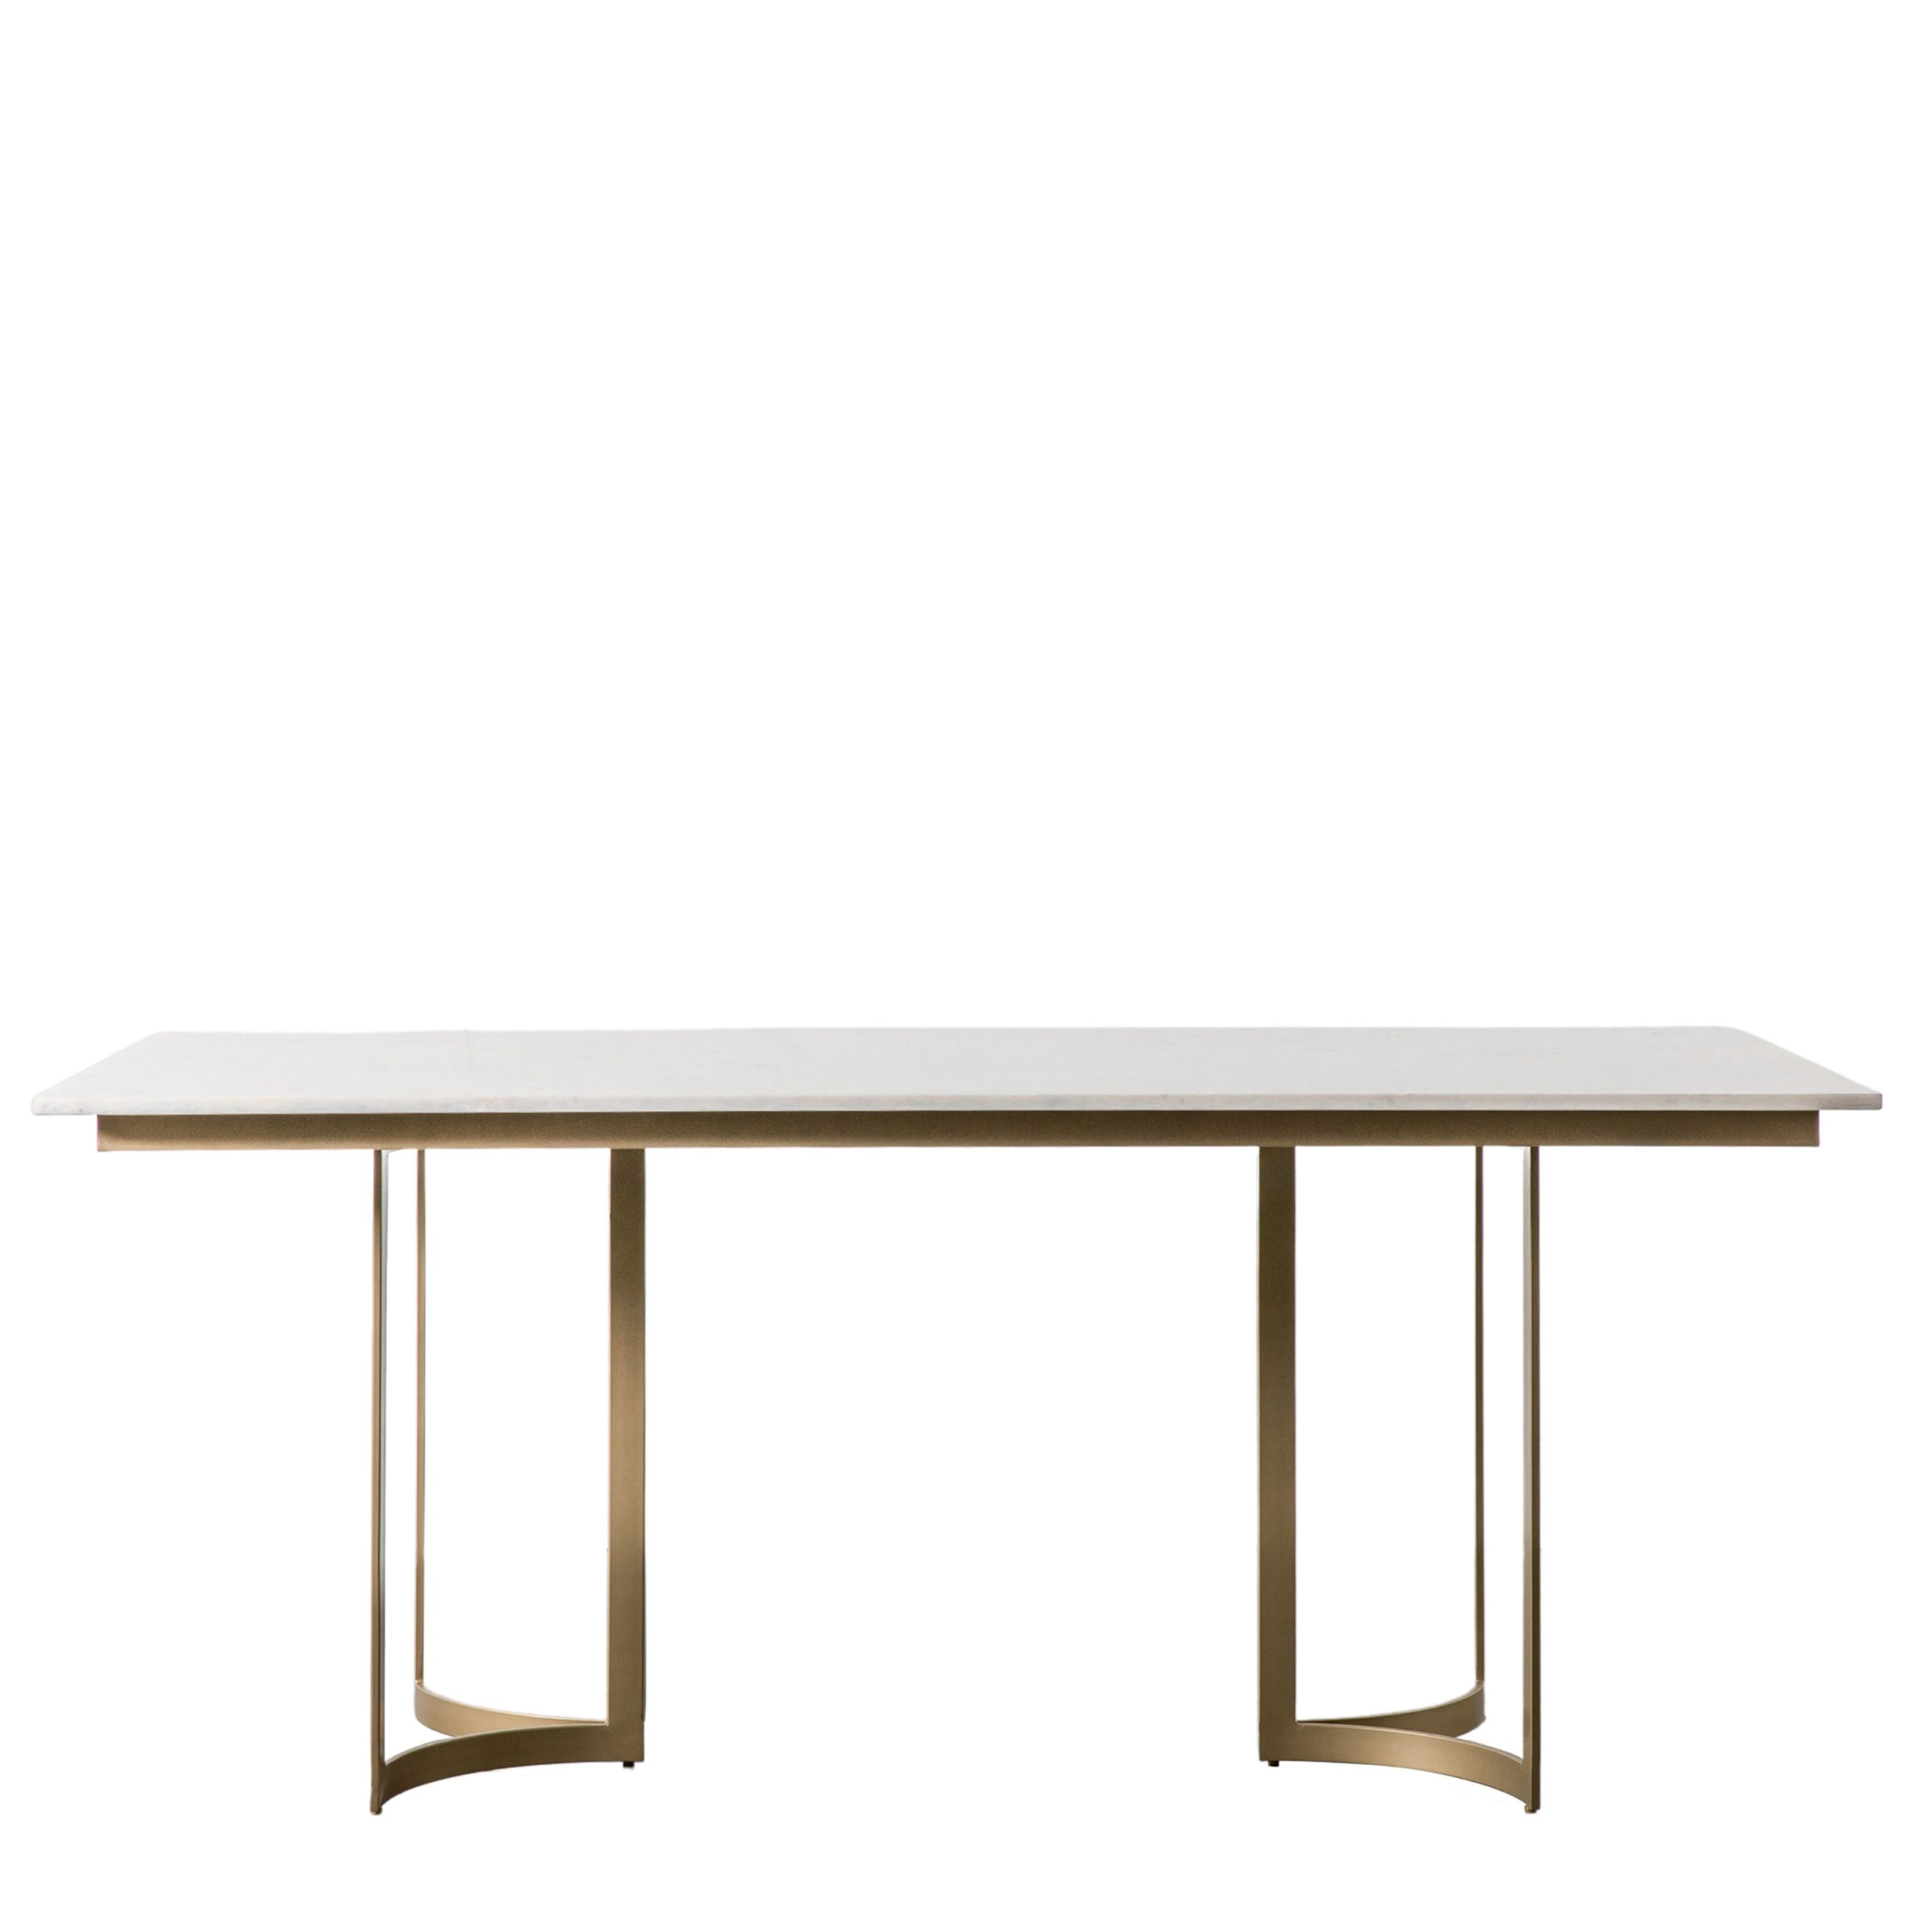 Gallery Direct Everton Dining Table Gold